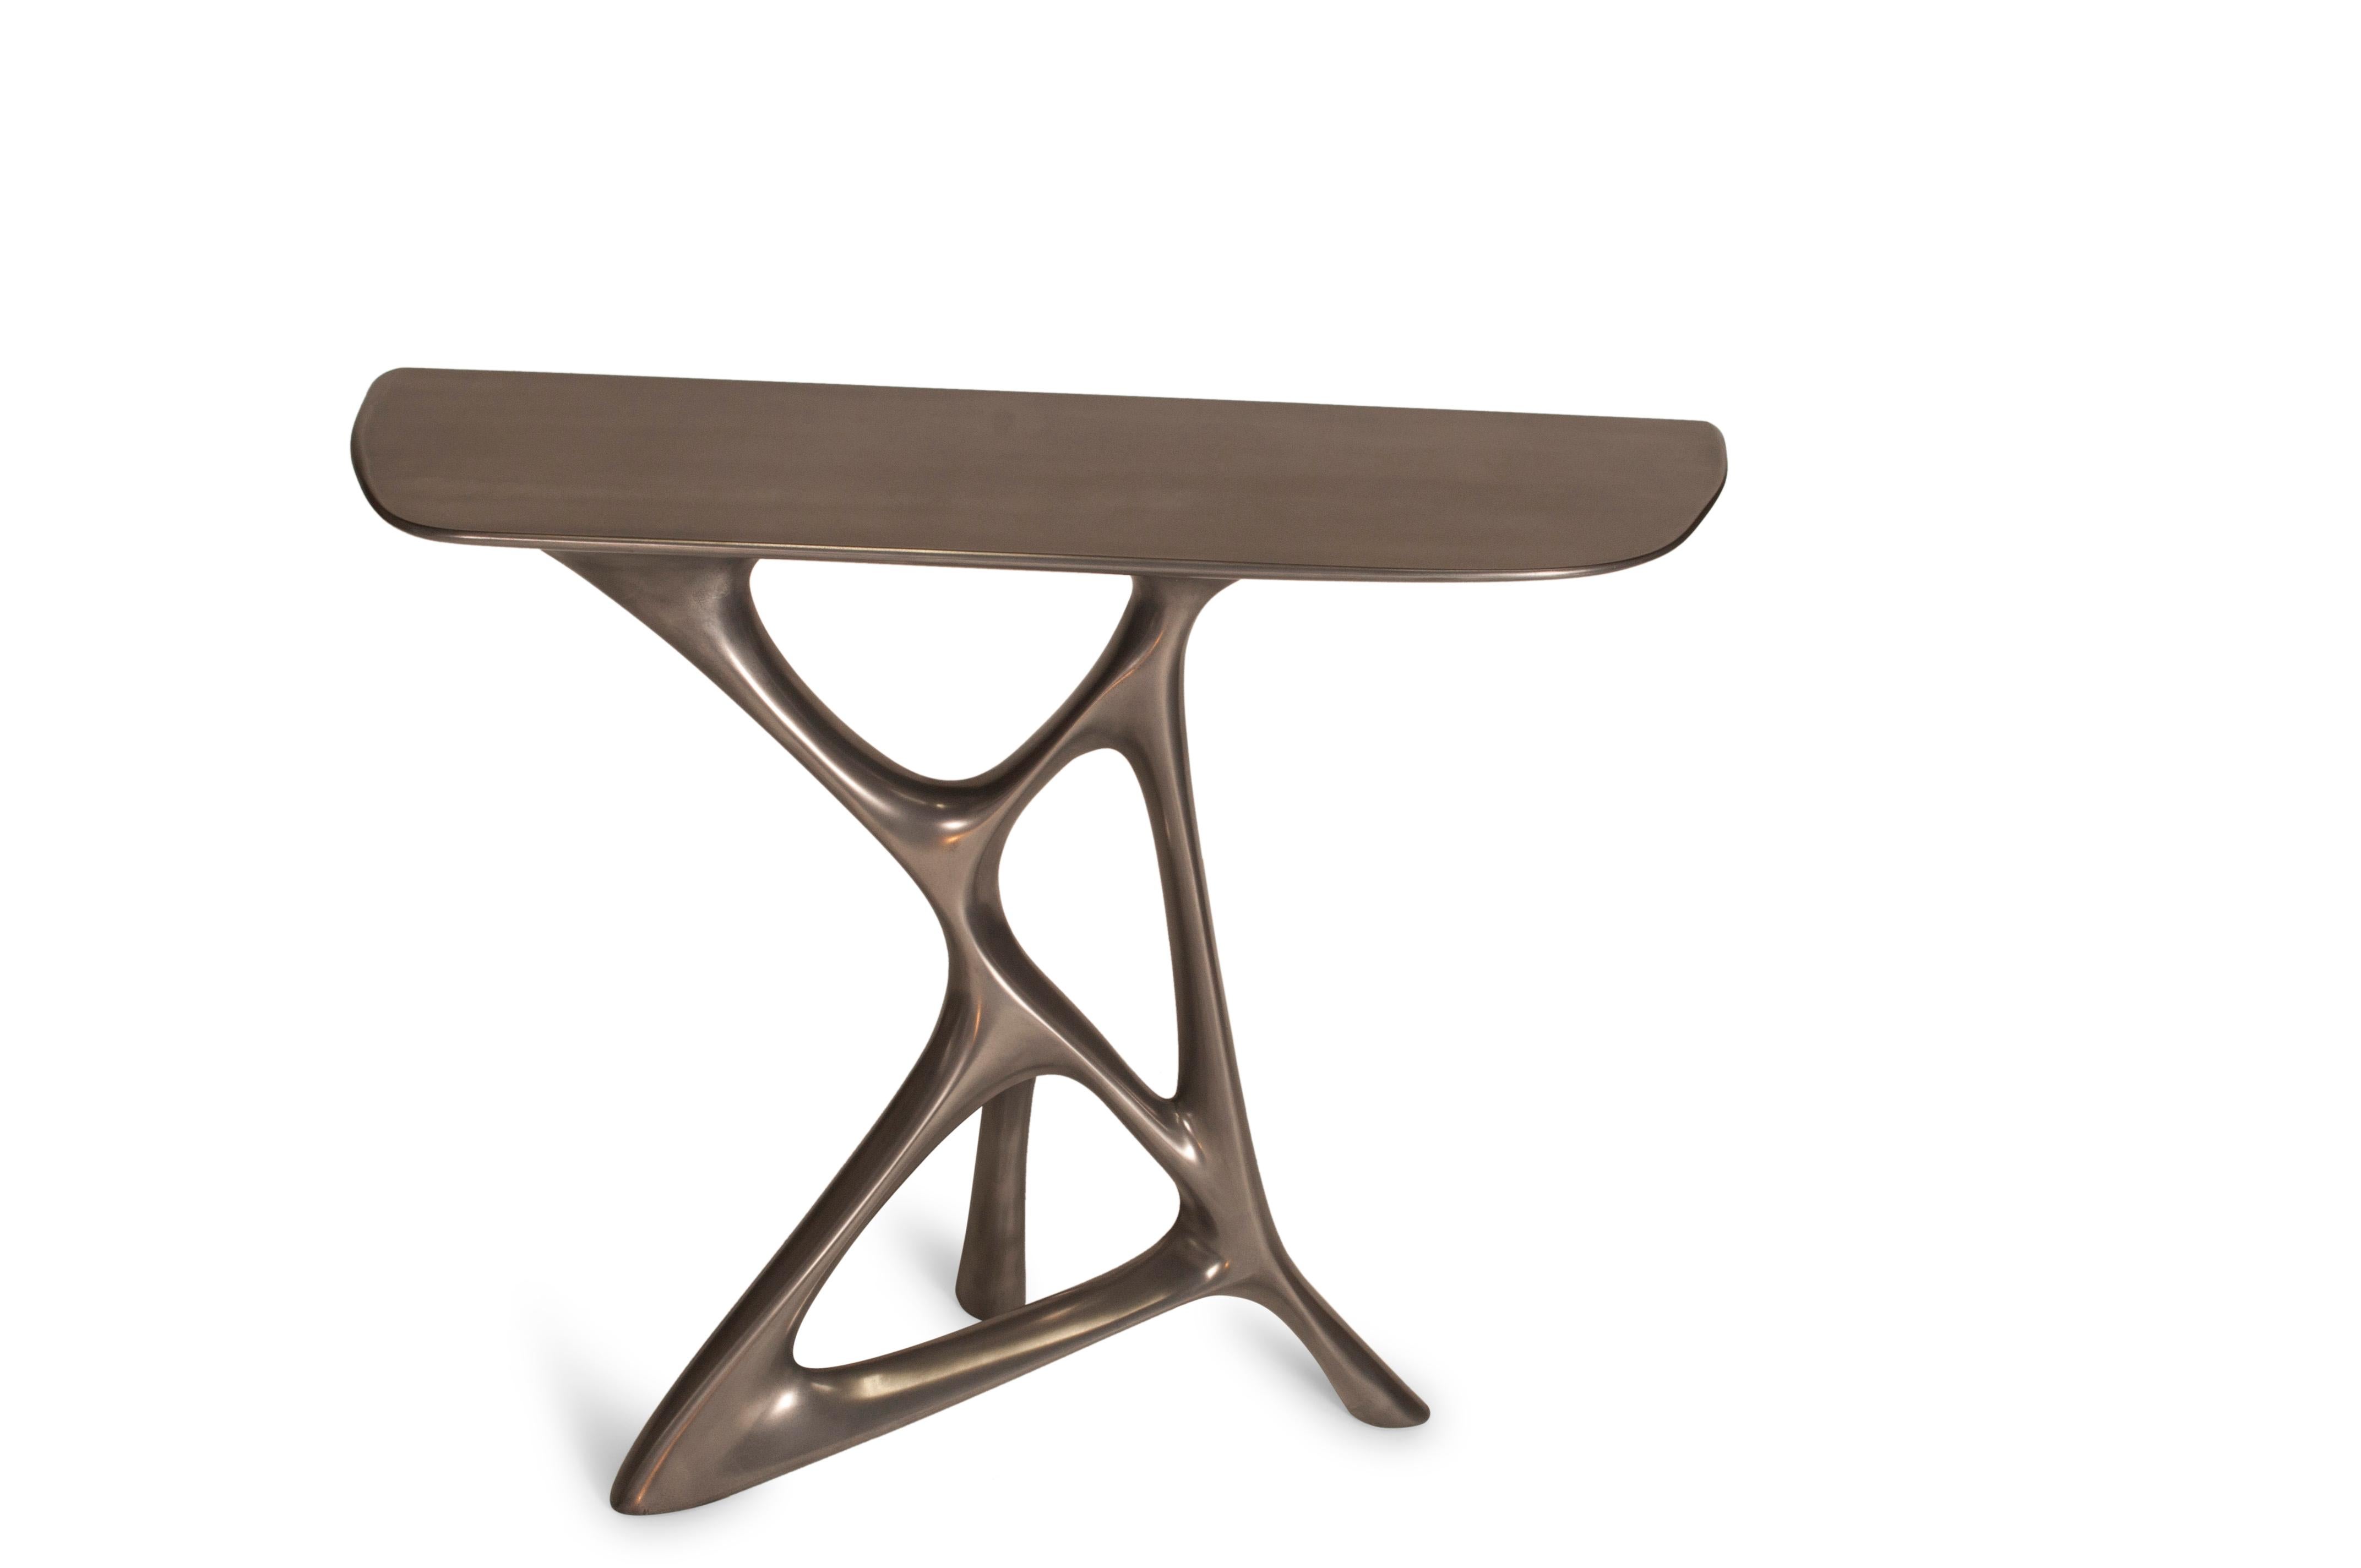 American Amorph Anika Console in Stainless Steel Finish